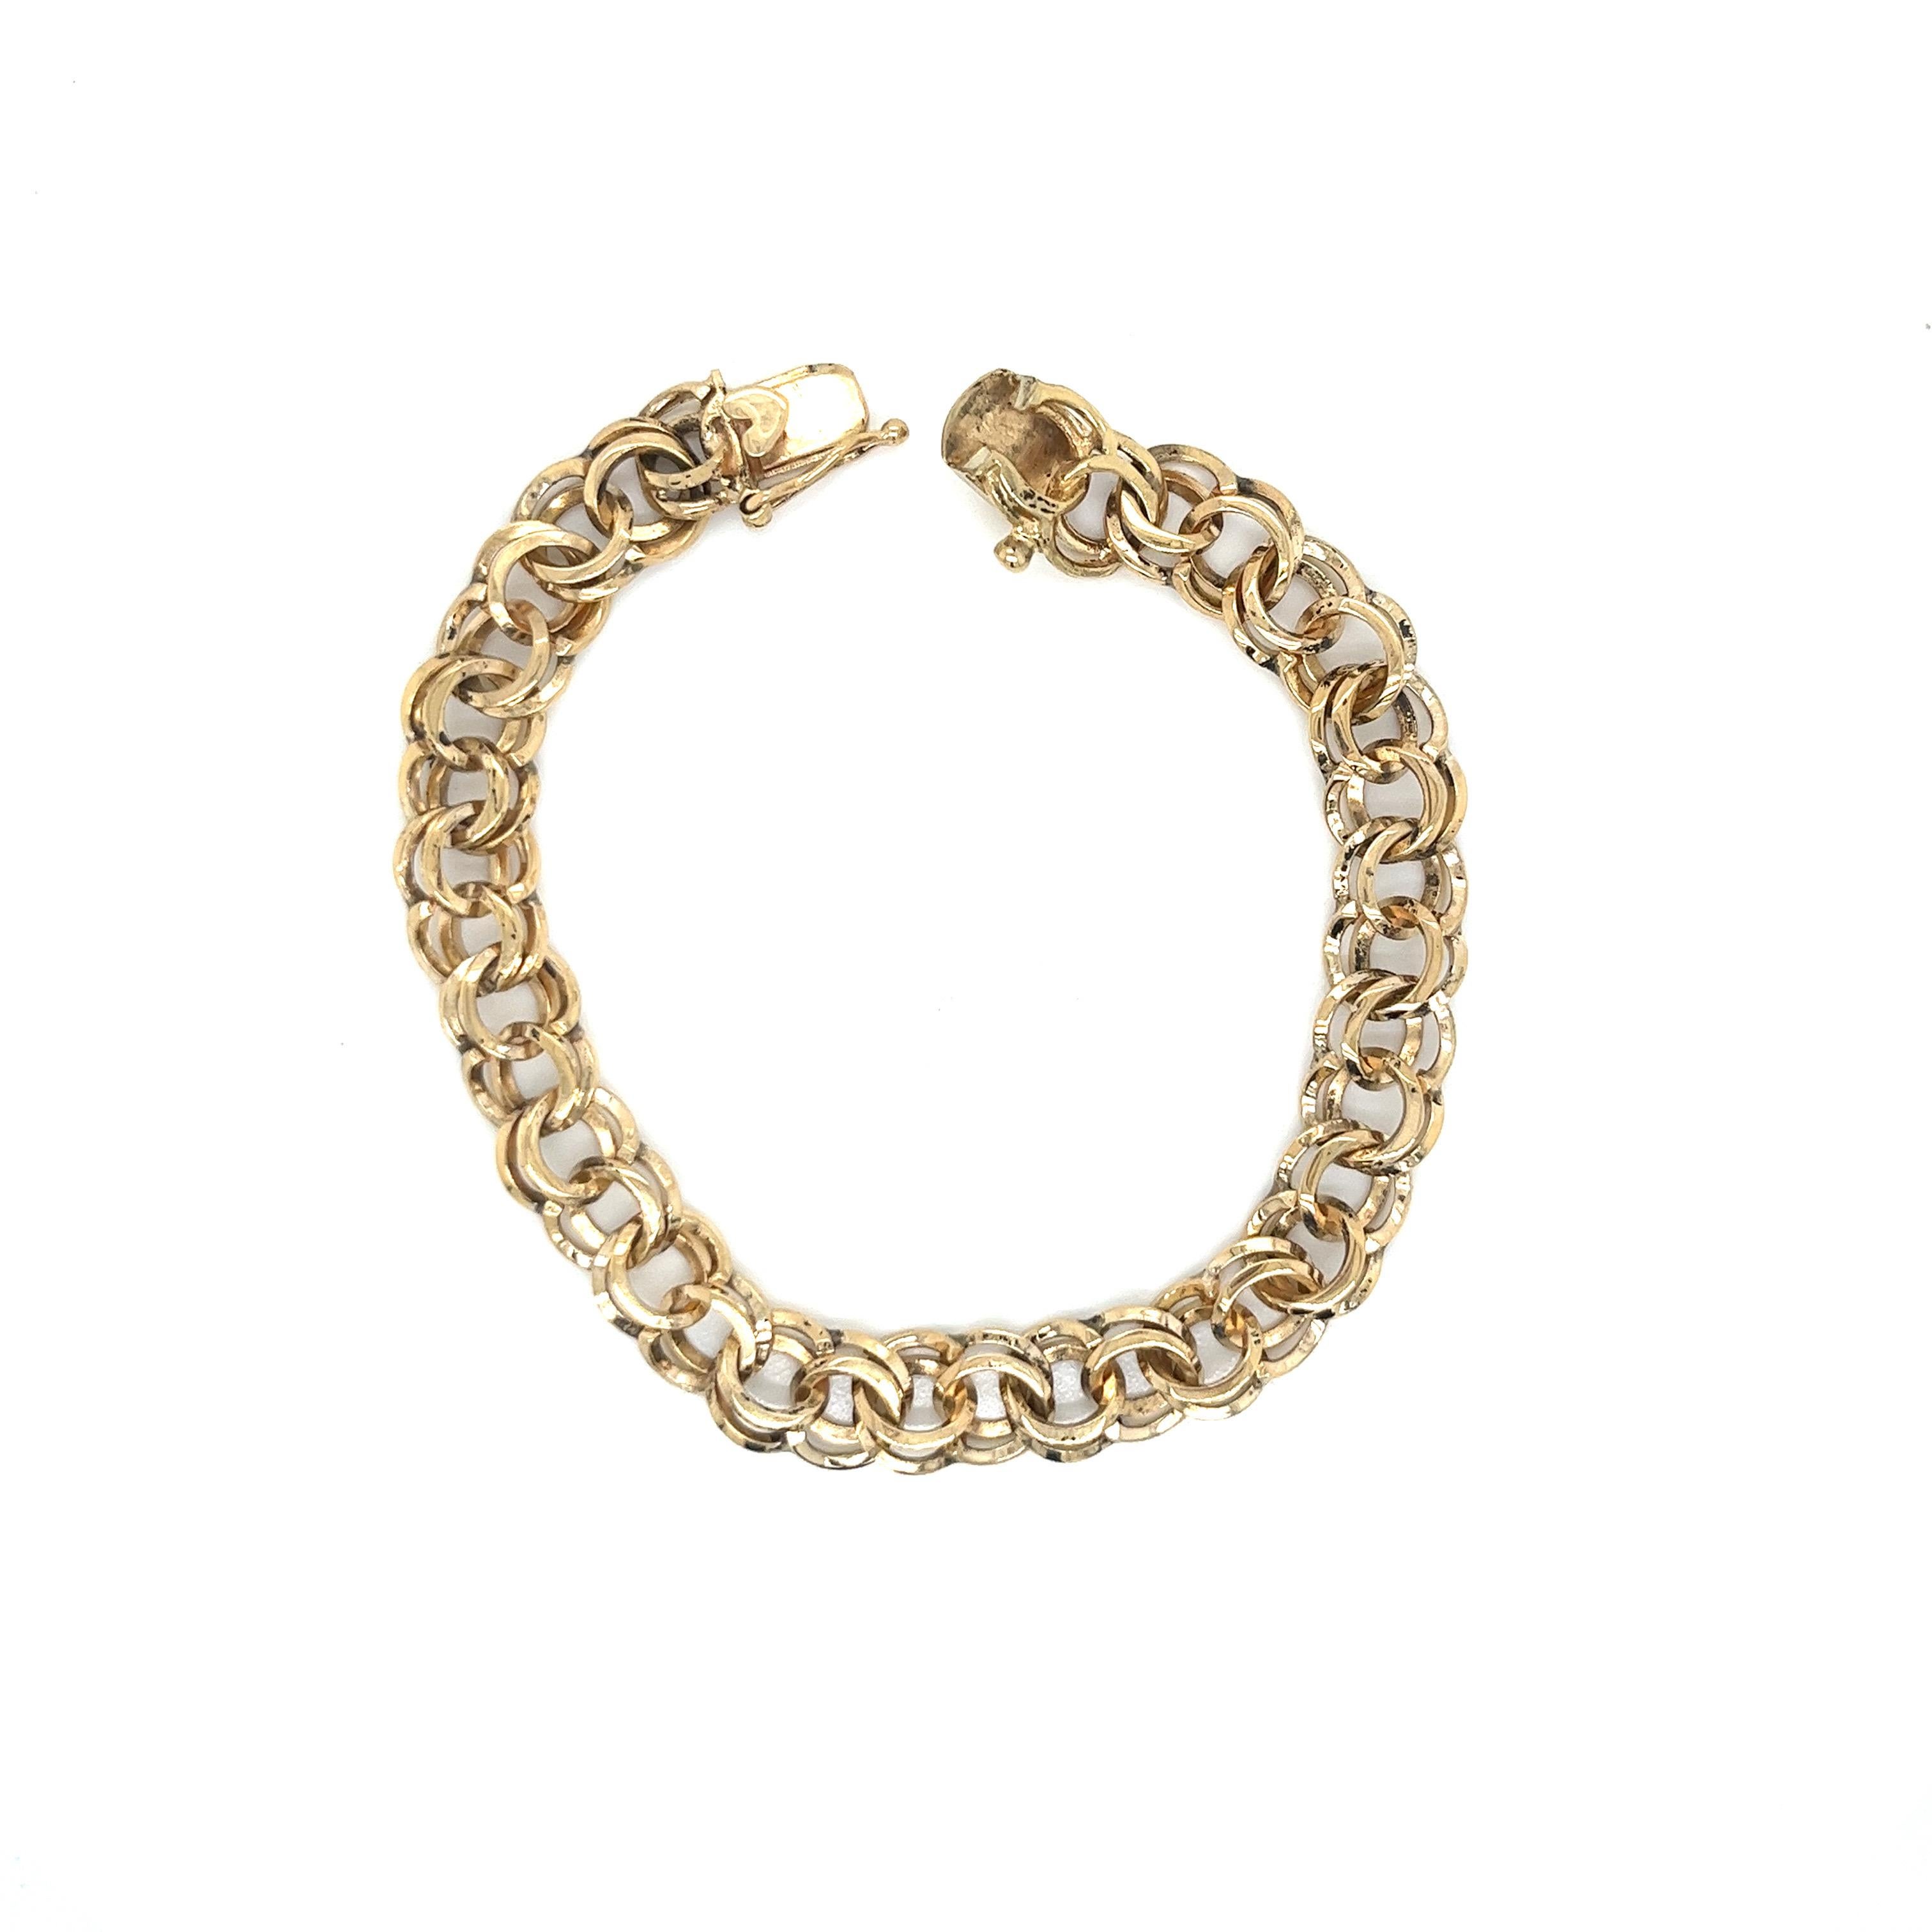 This exquisite 14k yellow gold double link charm bracelet is a true classic, showcasing the timeless allure of precious gold and the versatility of a traditional double link design. Crafted with impeccable attention to detail, it exudes a warm,